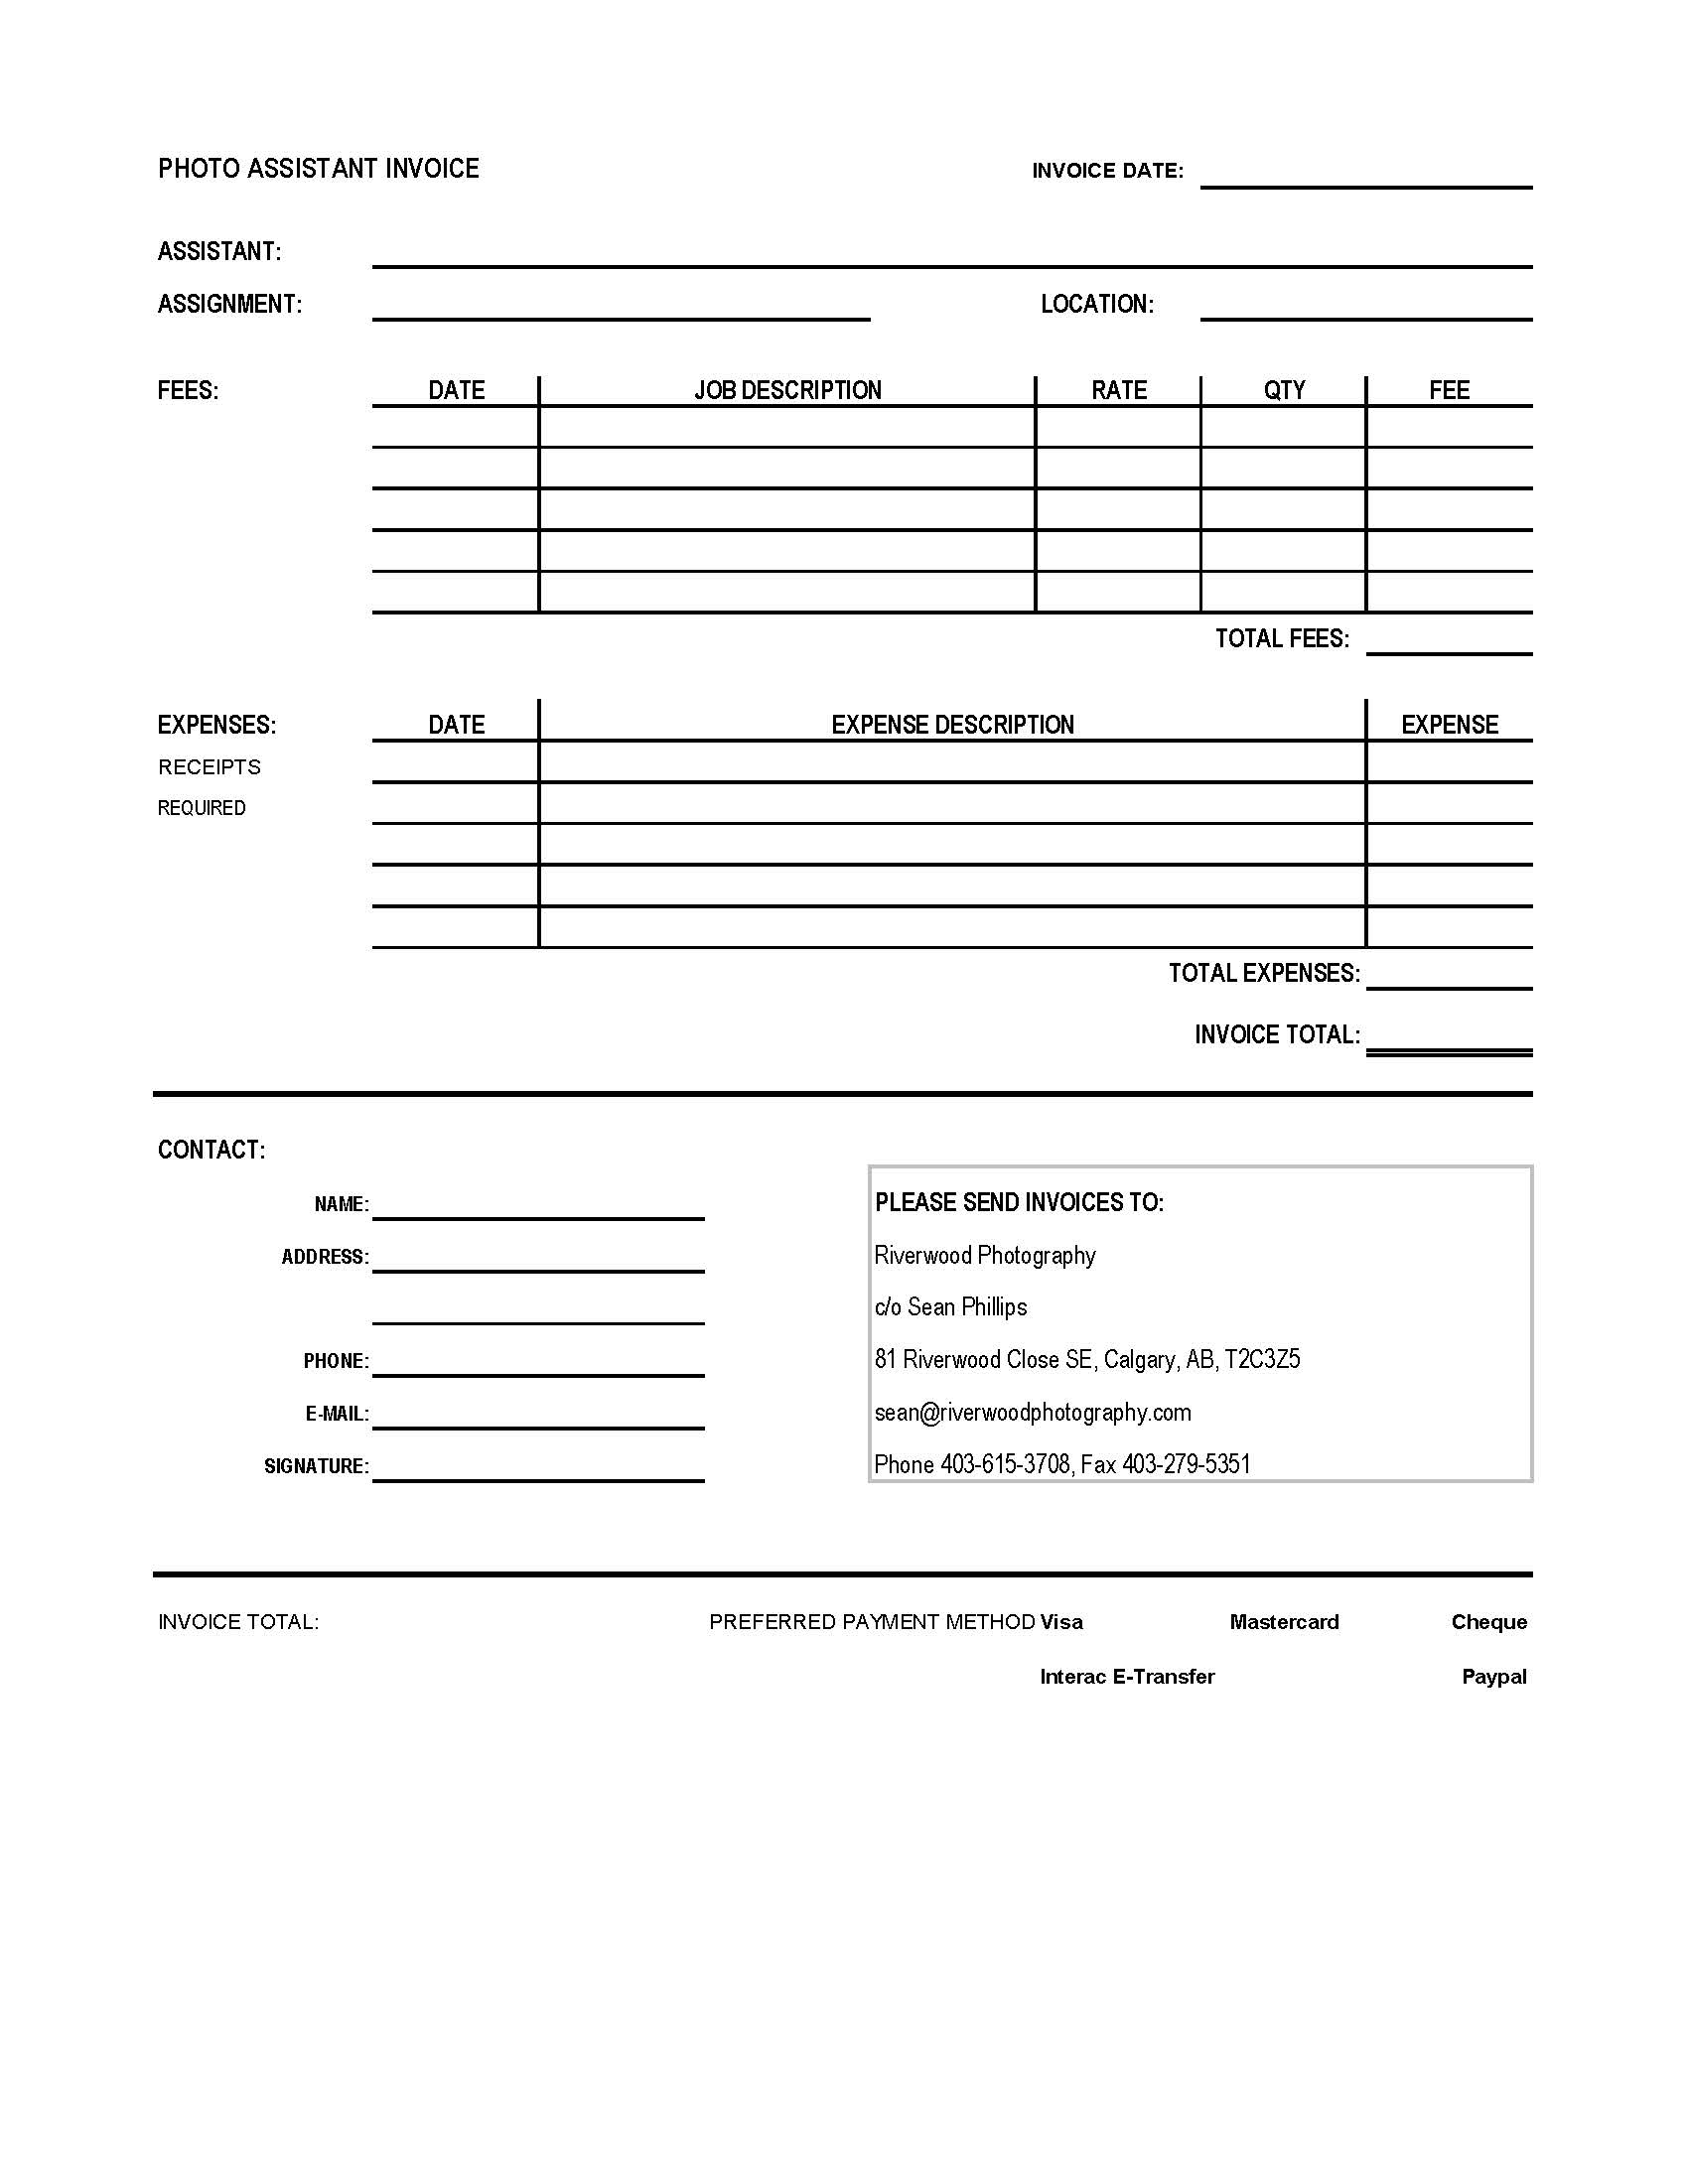 Riverwood Photography Photo Assistant Invoice - Excel